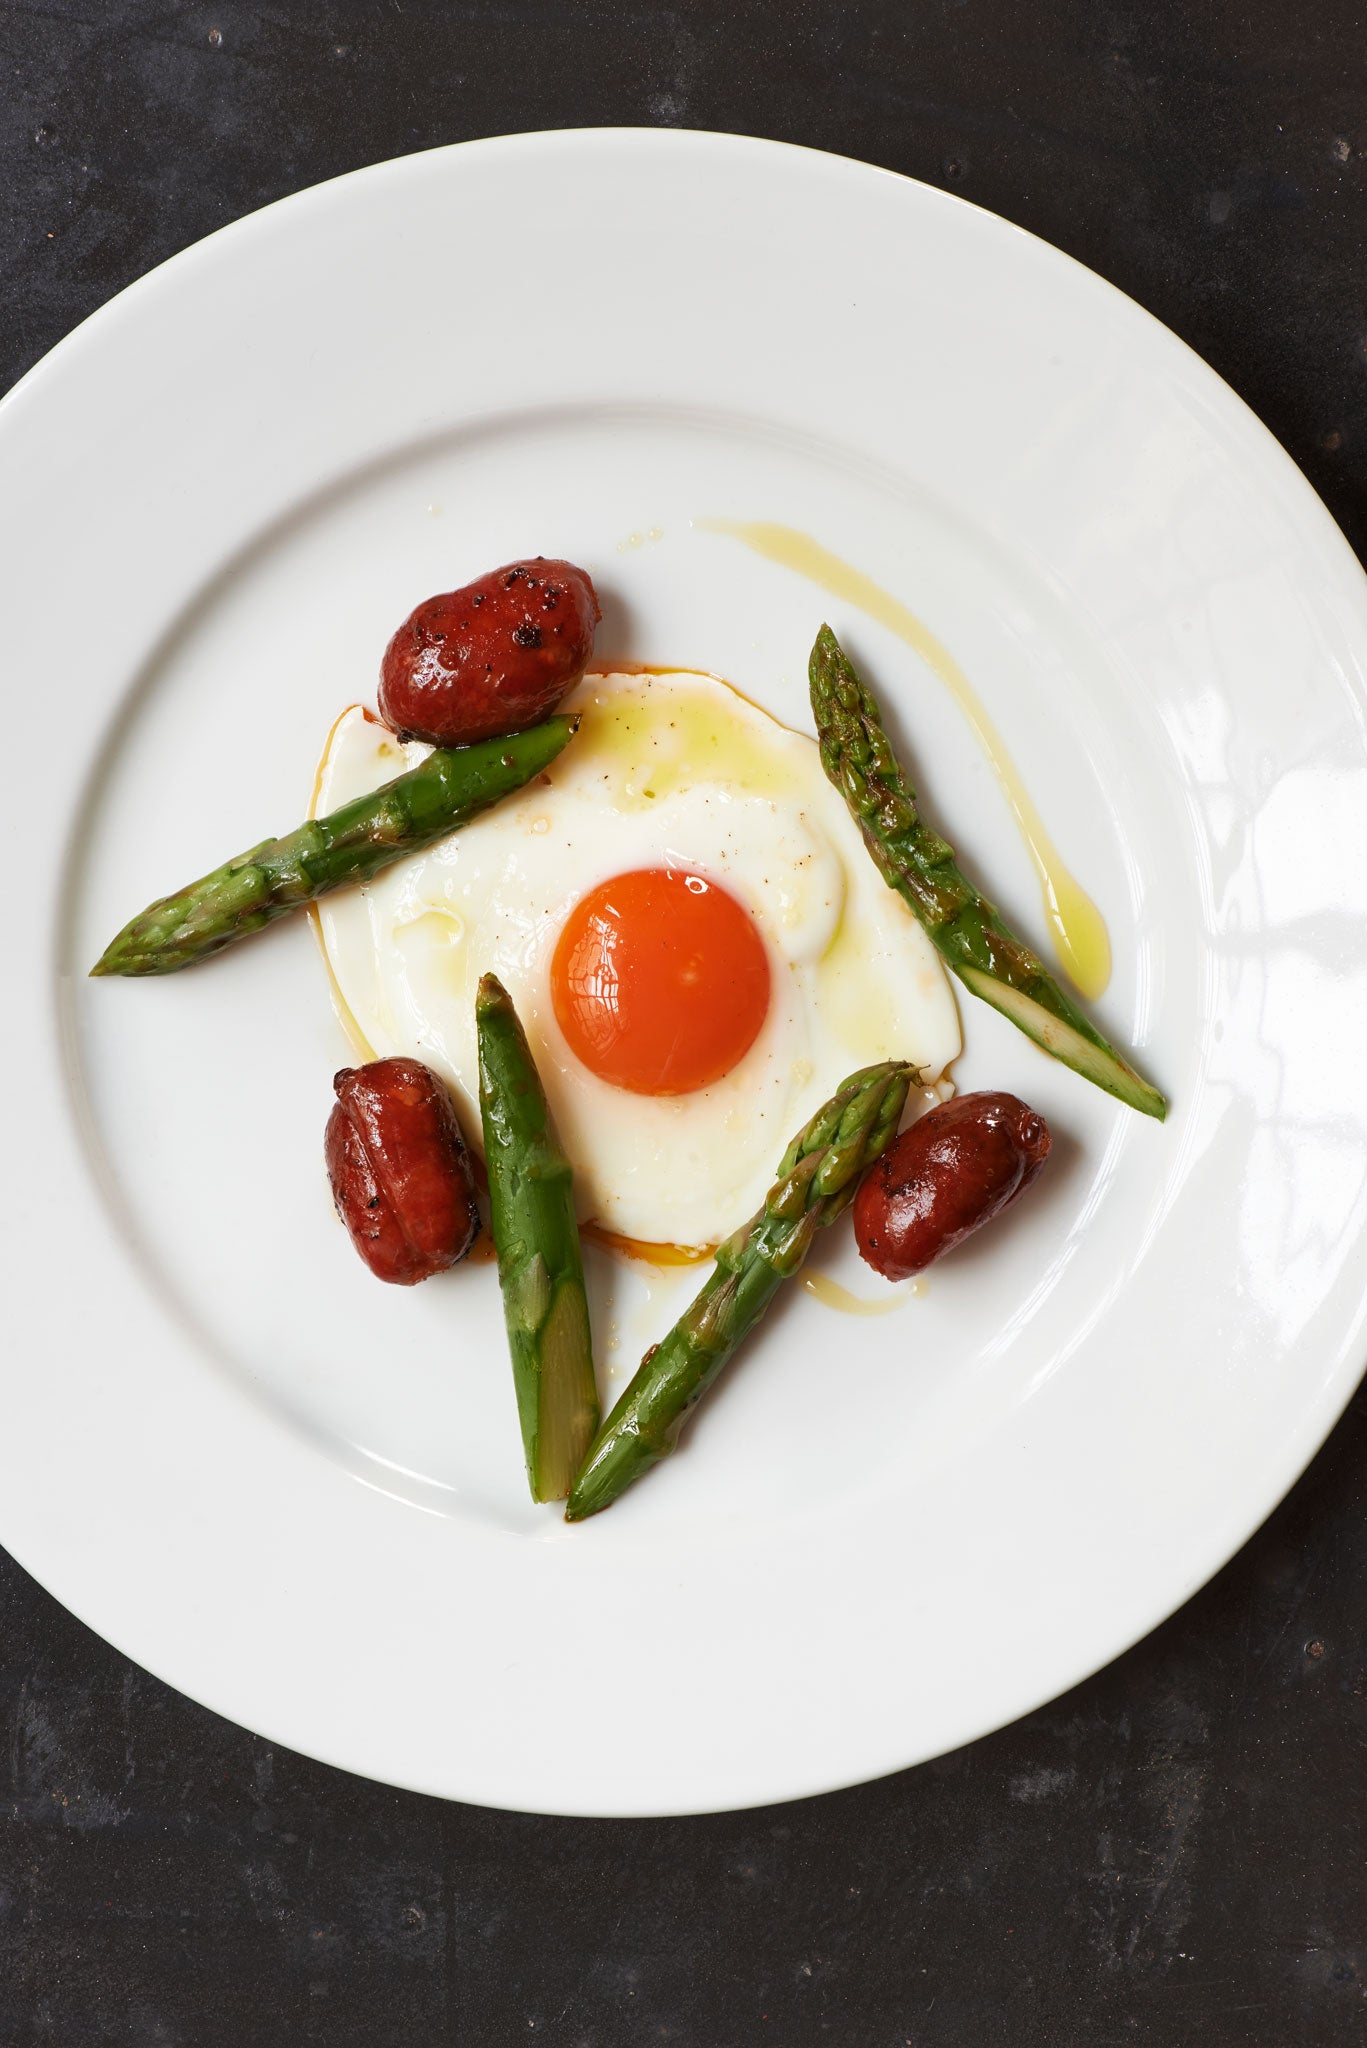 Fried egg, chorizo and asparagus makes a lovely brunch or breakfast